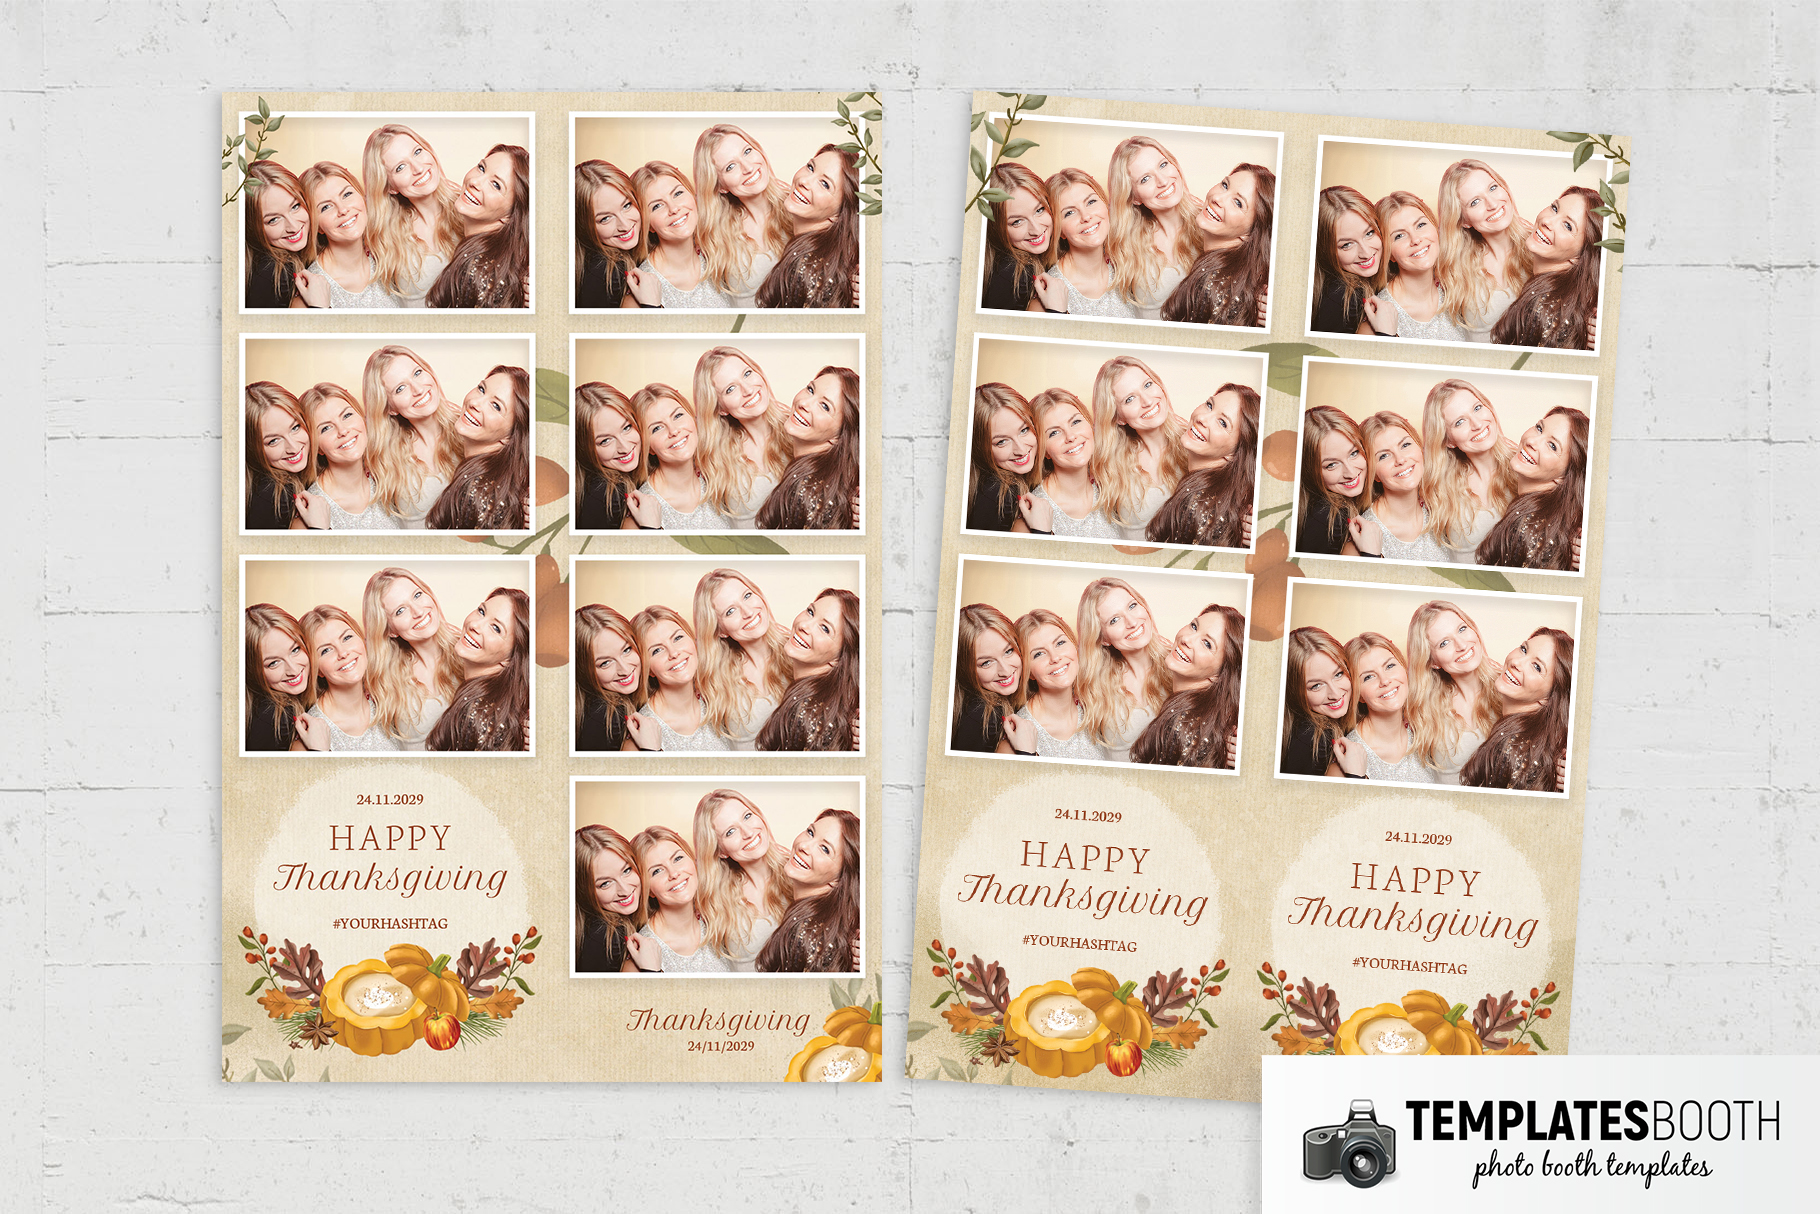 Happy Thanksgiving Photo Booth Template (PSD Format)